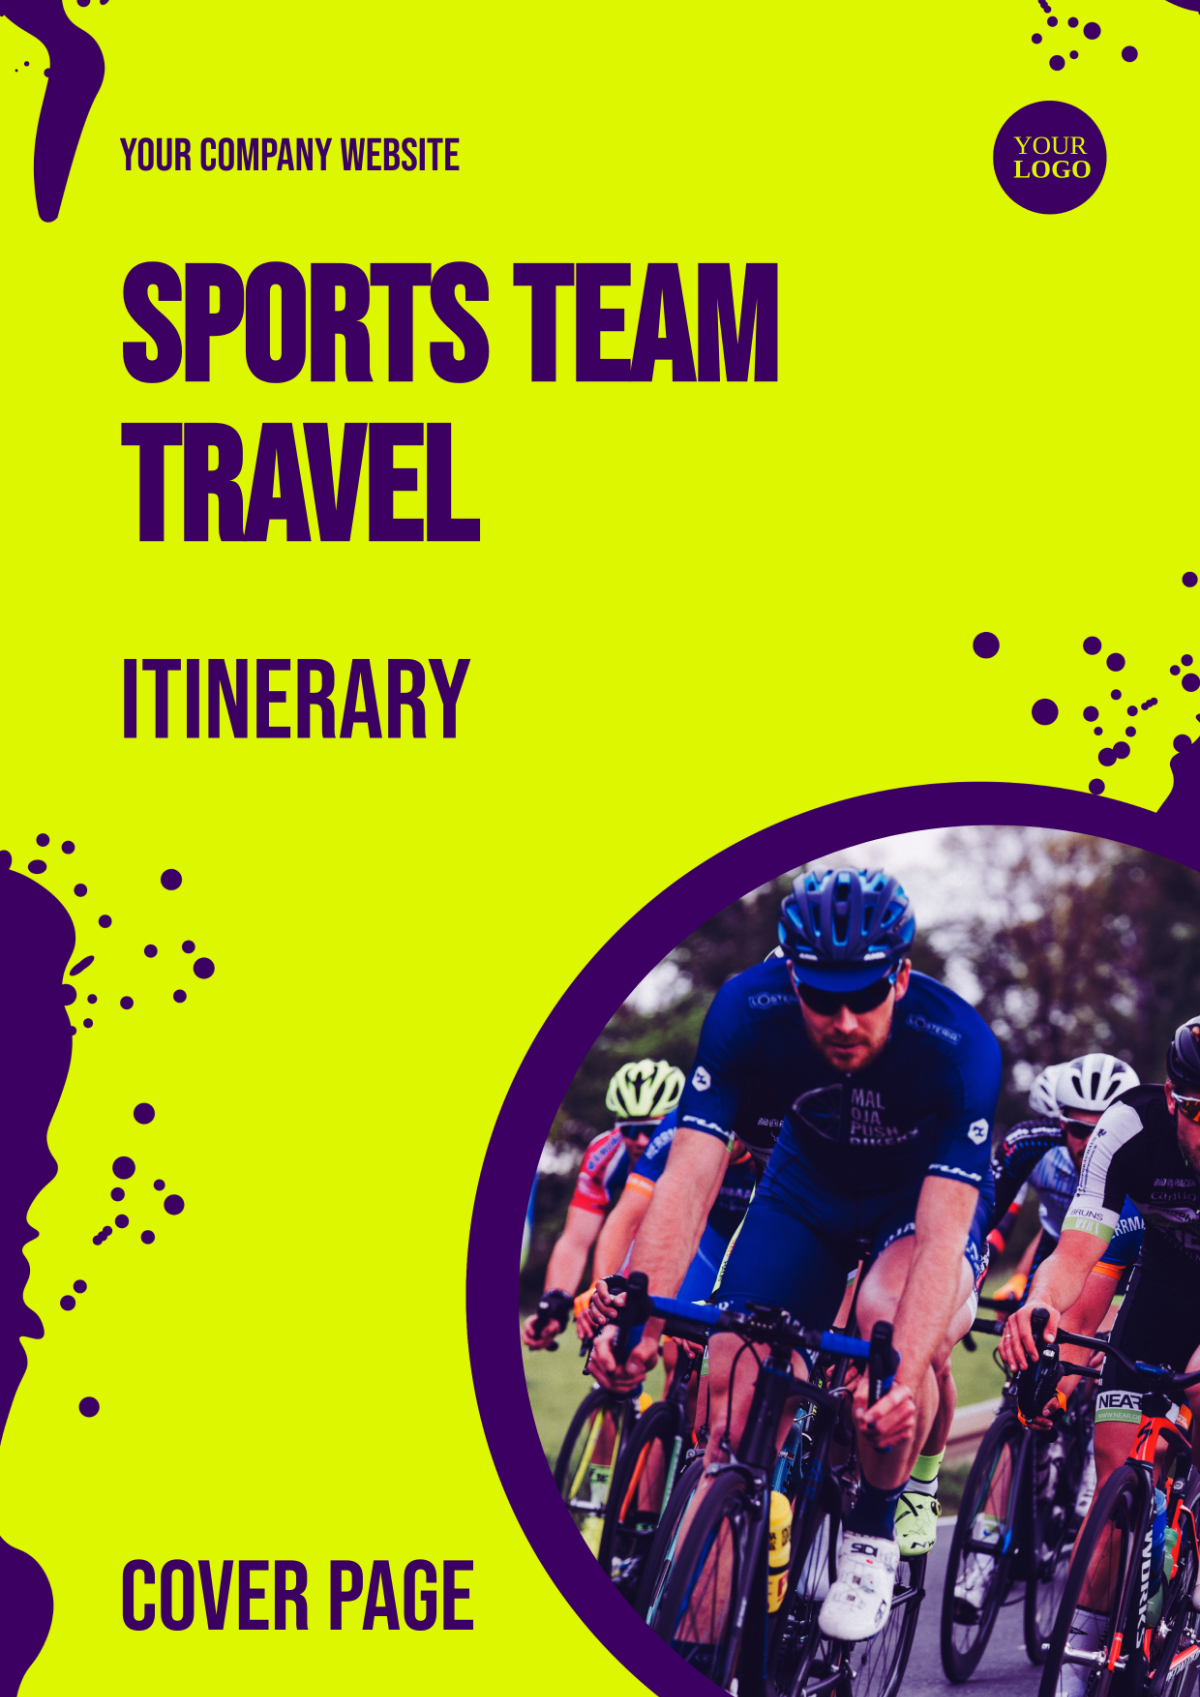 Free Sports Team Travel Itinerary Cover Page Template